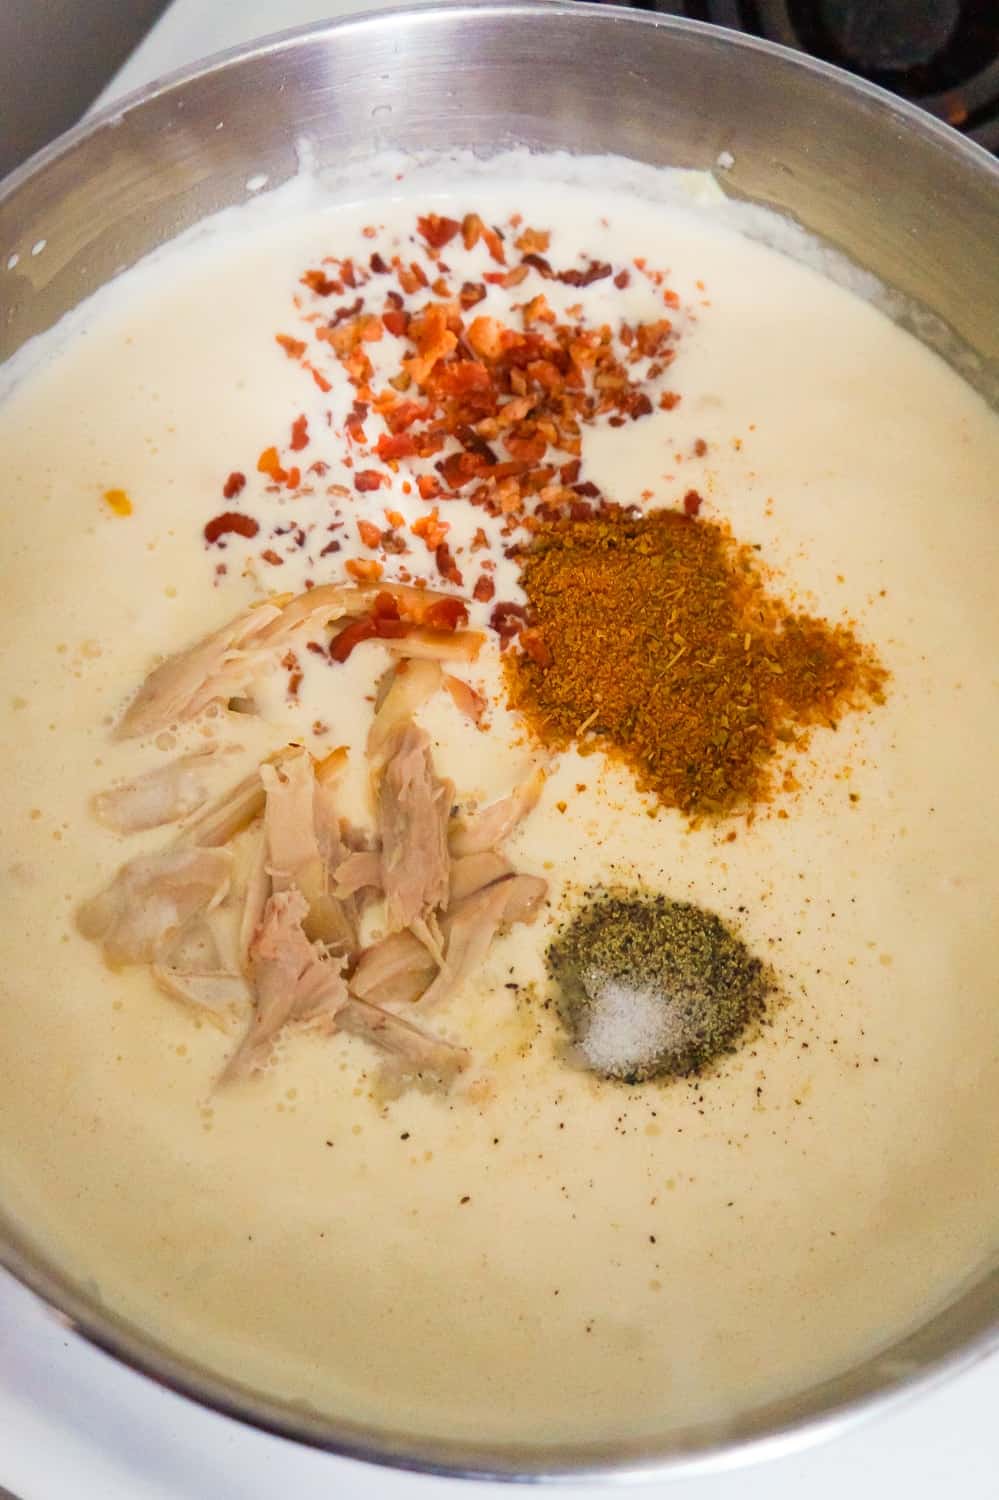 shredded rotisserie chicken, cajun spice, bacon bits, salt and pepper added to a creamy liquid